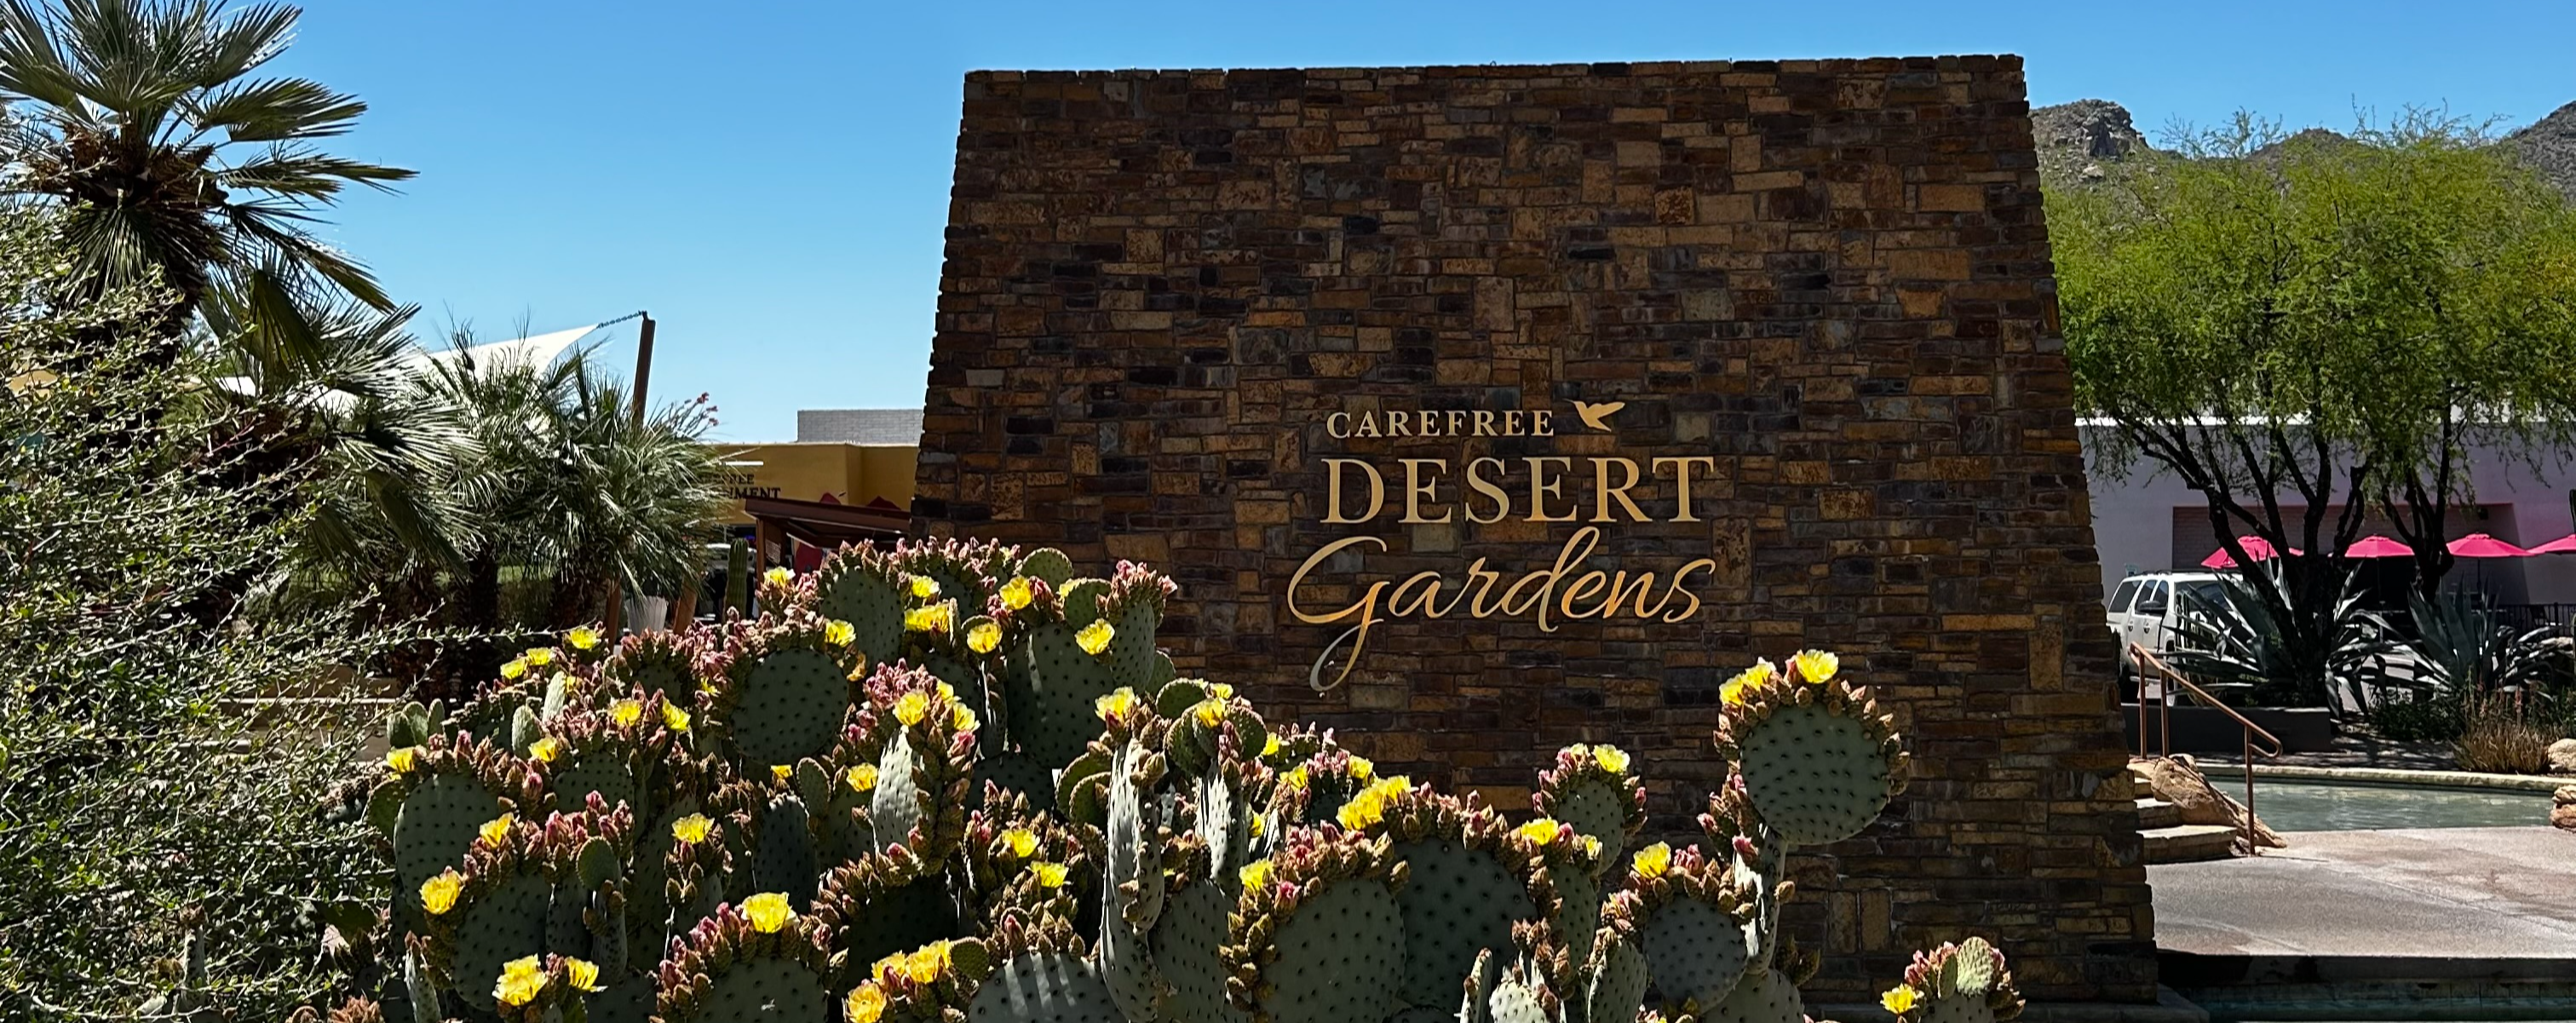 Carefree Desert Gardens sign with blooming cacti